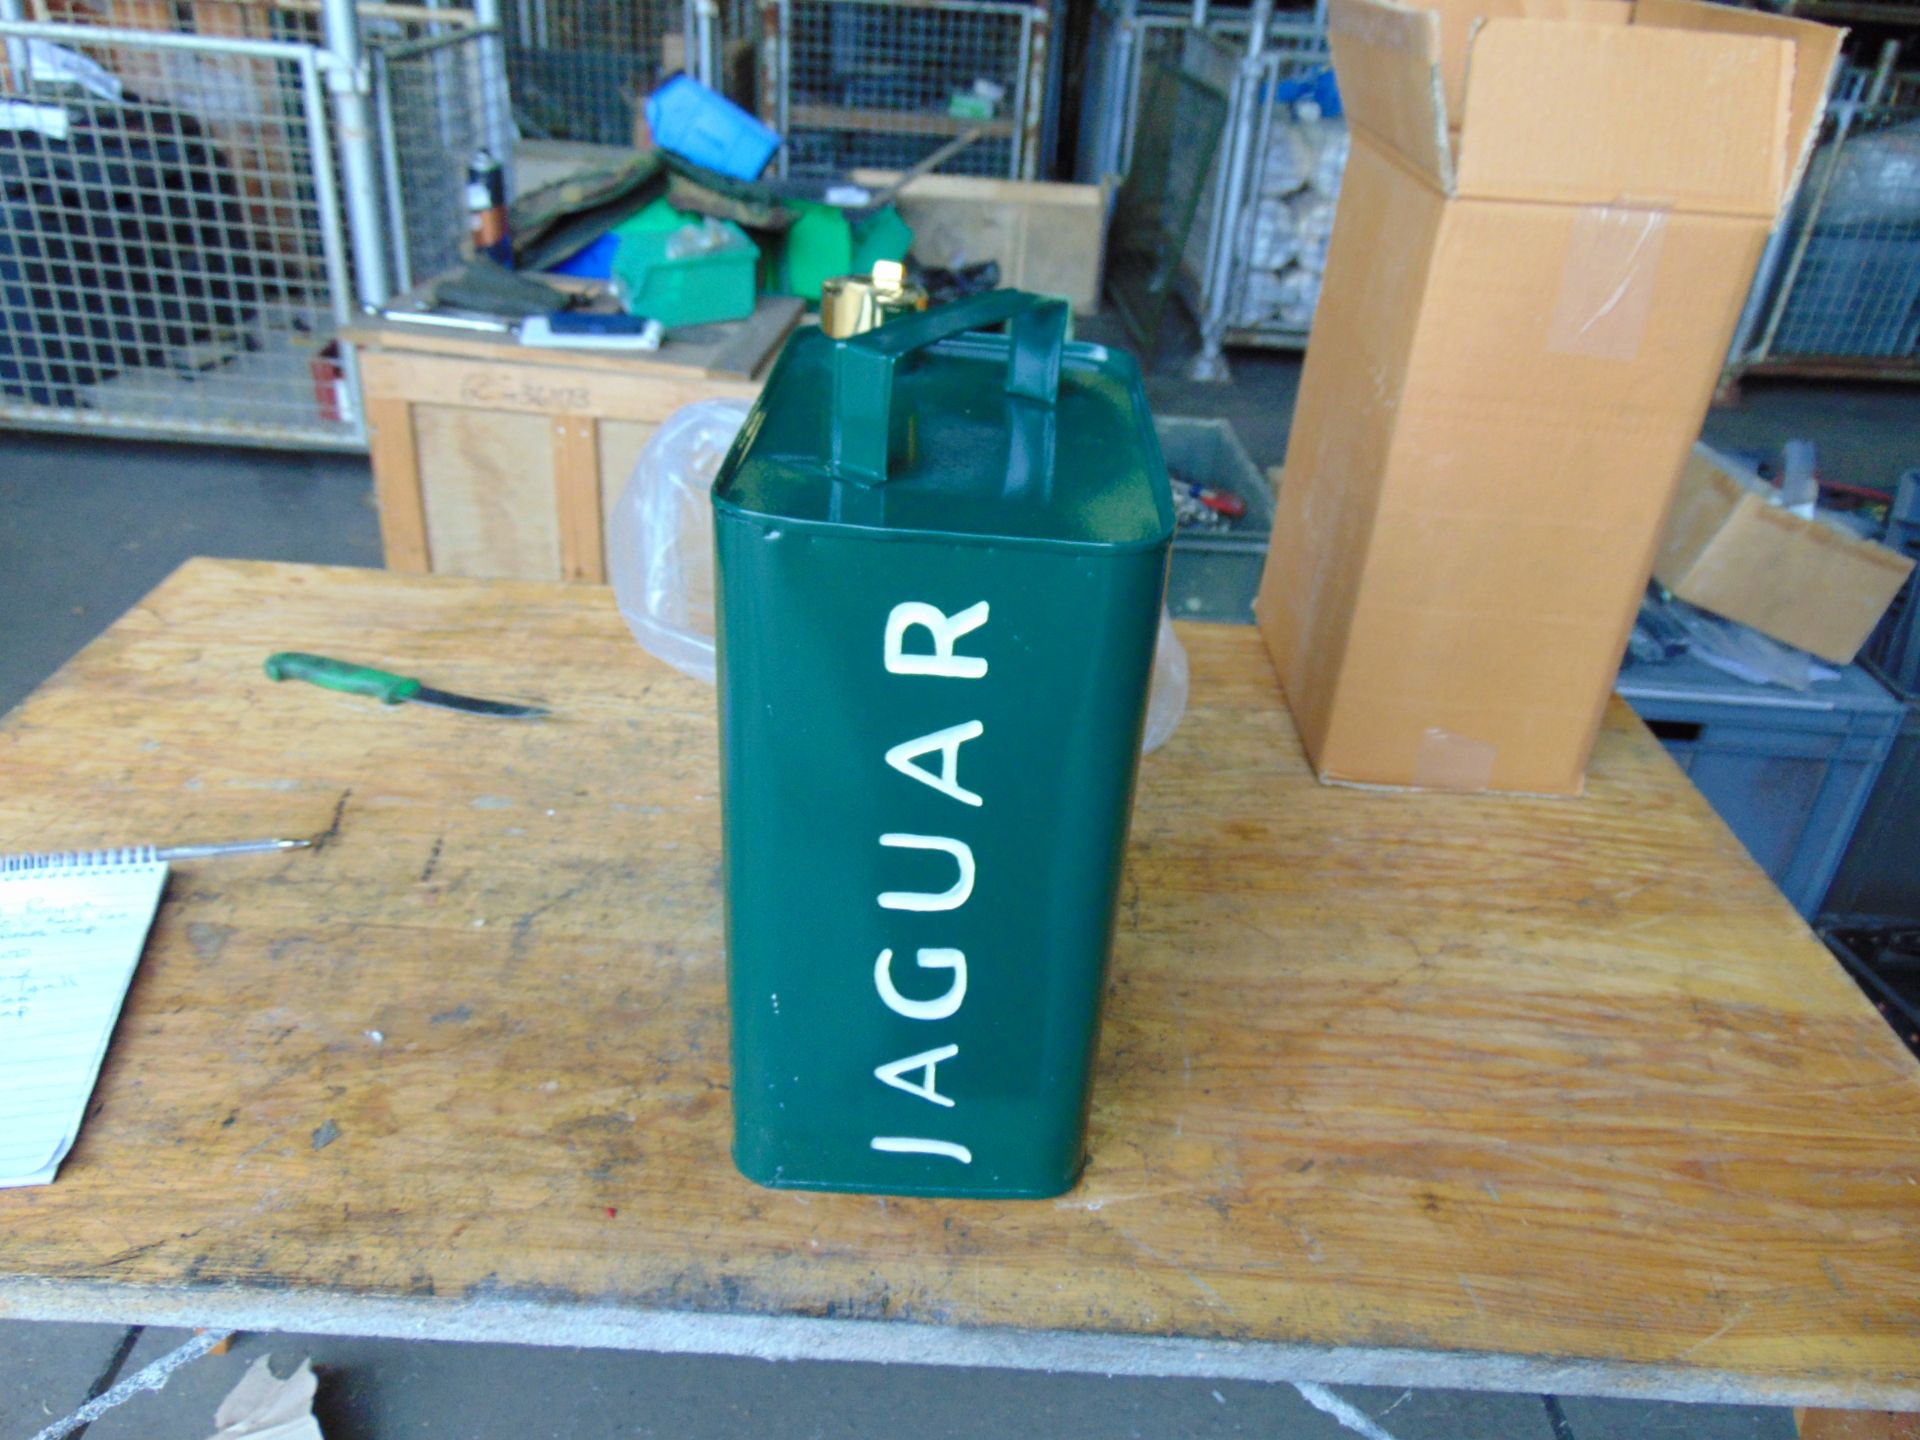 New Unissued Jaguar 1 Gall Fuel/Oil Can with Grass Cap - Image 3 of 5